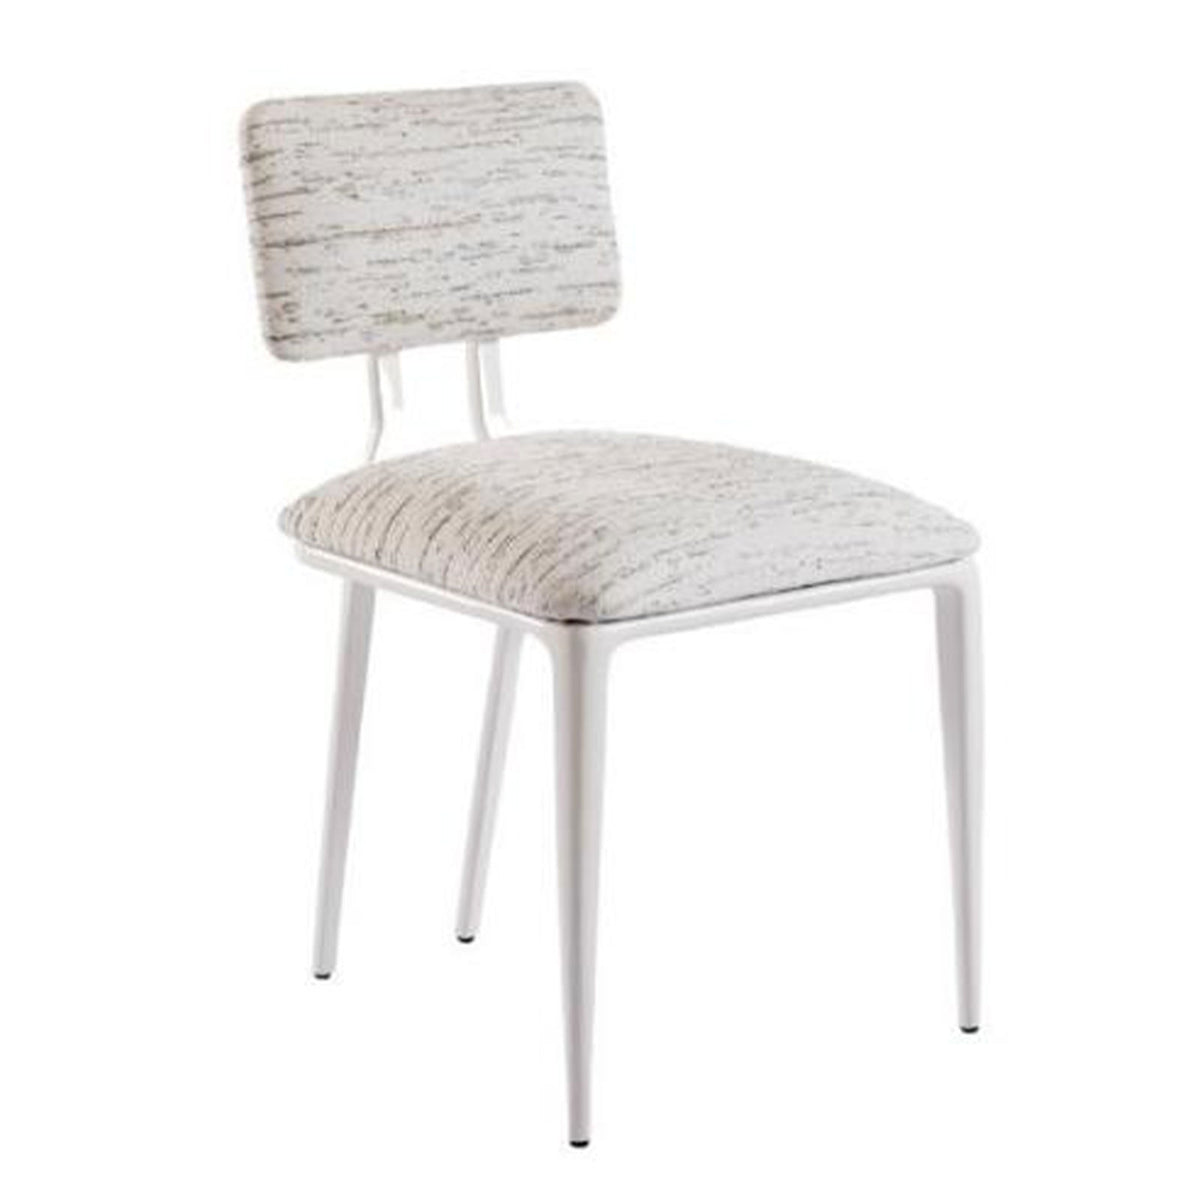 Edesia Outdoor Dining Chair